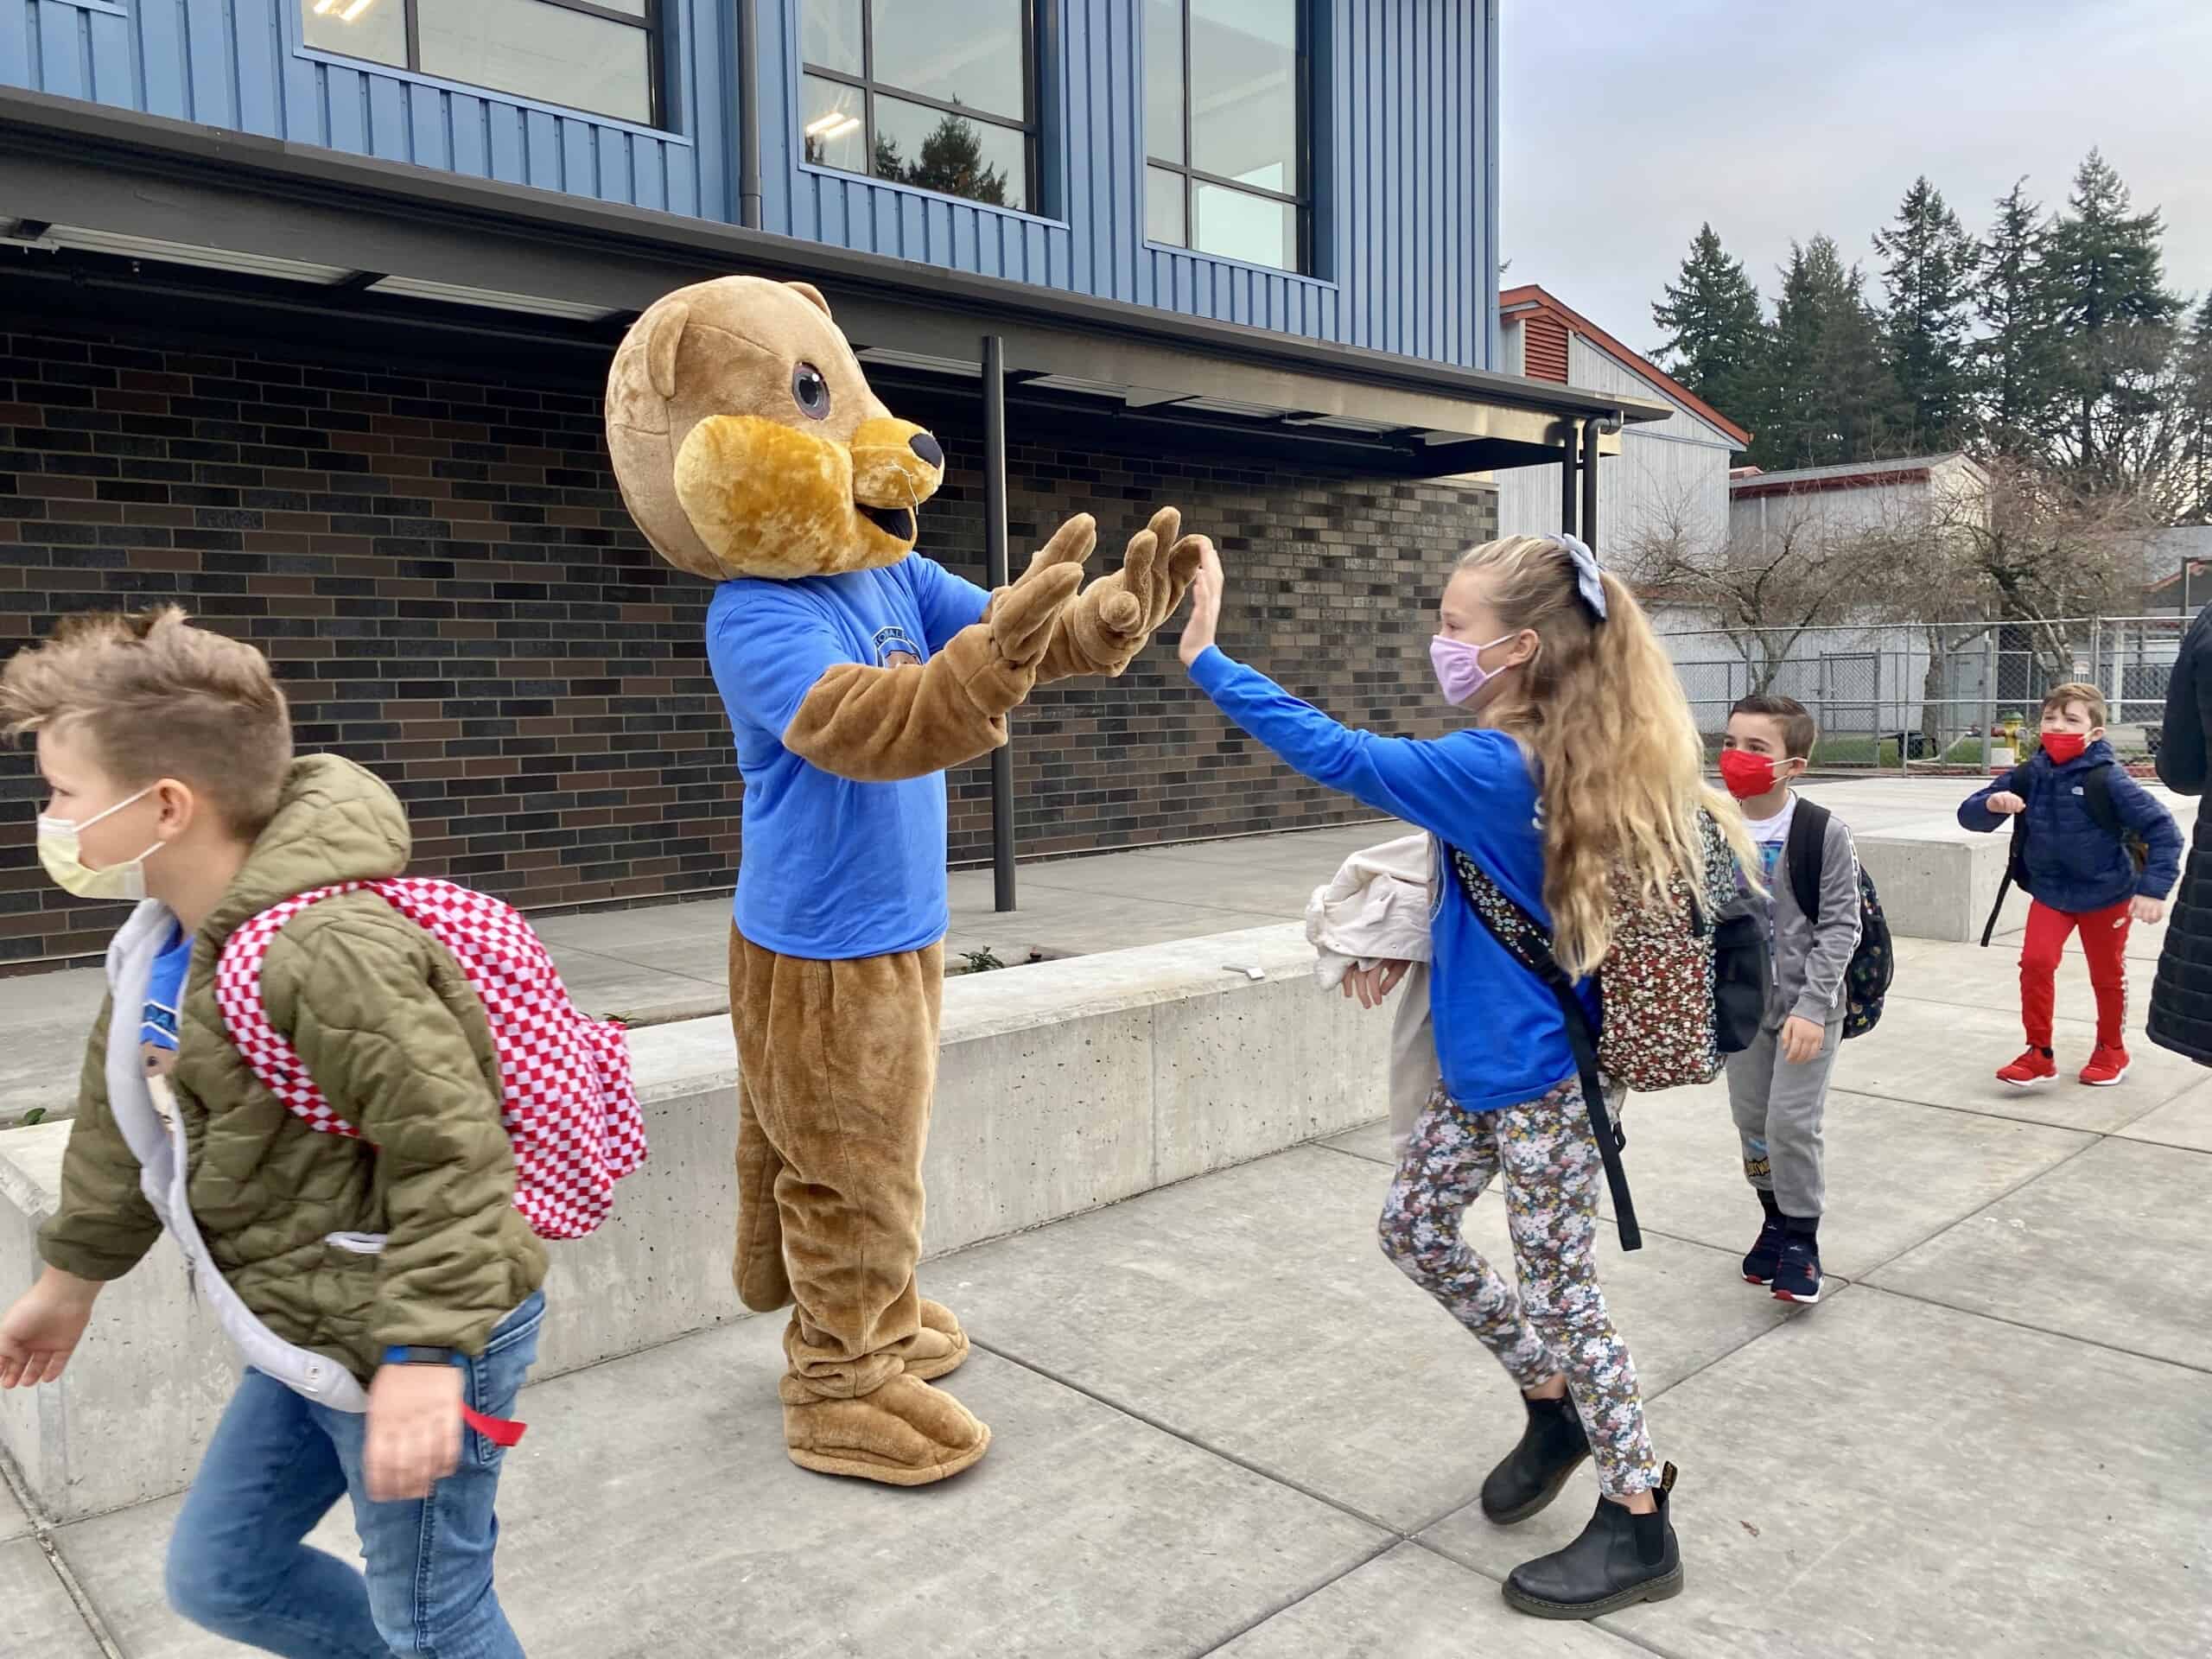 Sophia Sandquist gives a high five to Ollie the Otter on the first day of classes at the newly constructed Artondale Elementary School building, on Nov. 22,